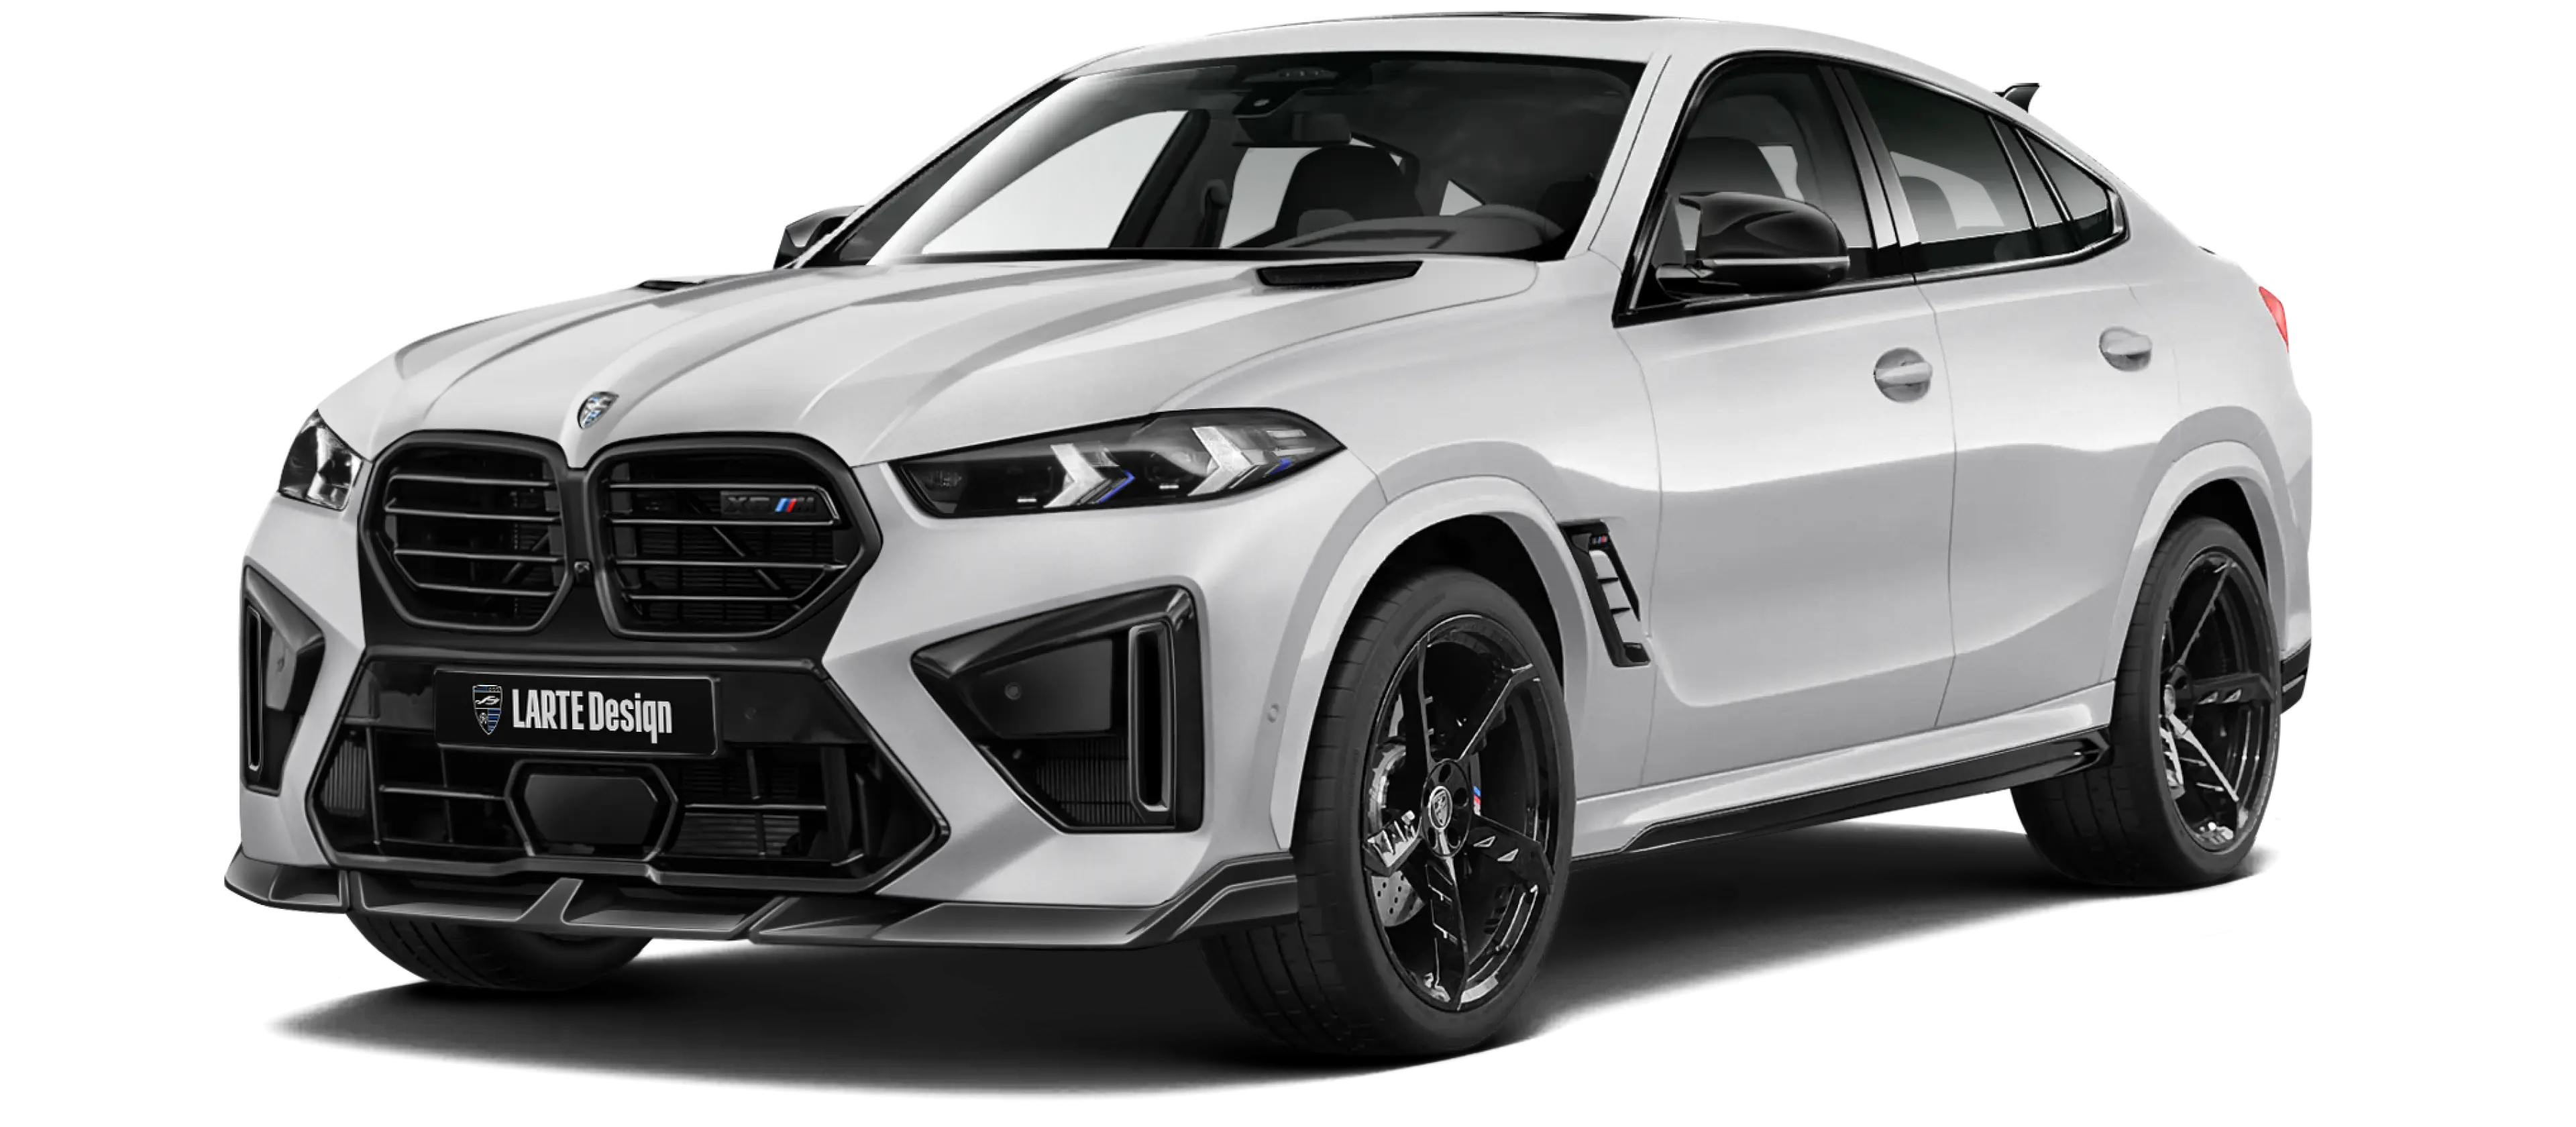 BMW X6M F96 LCI 2023 with painted body kit: front view shown in White mineral